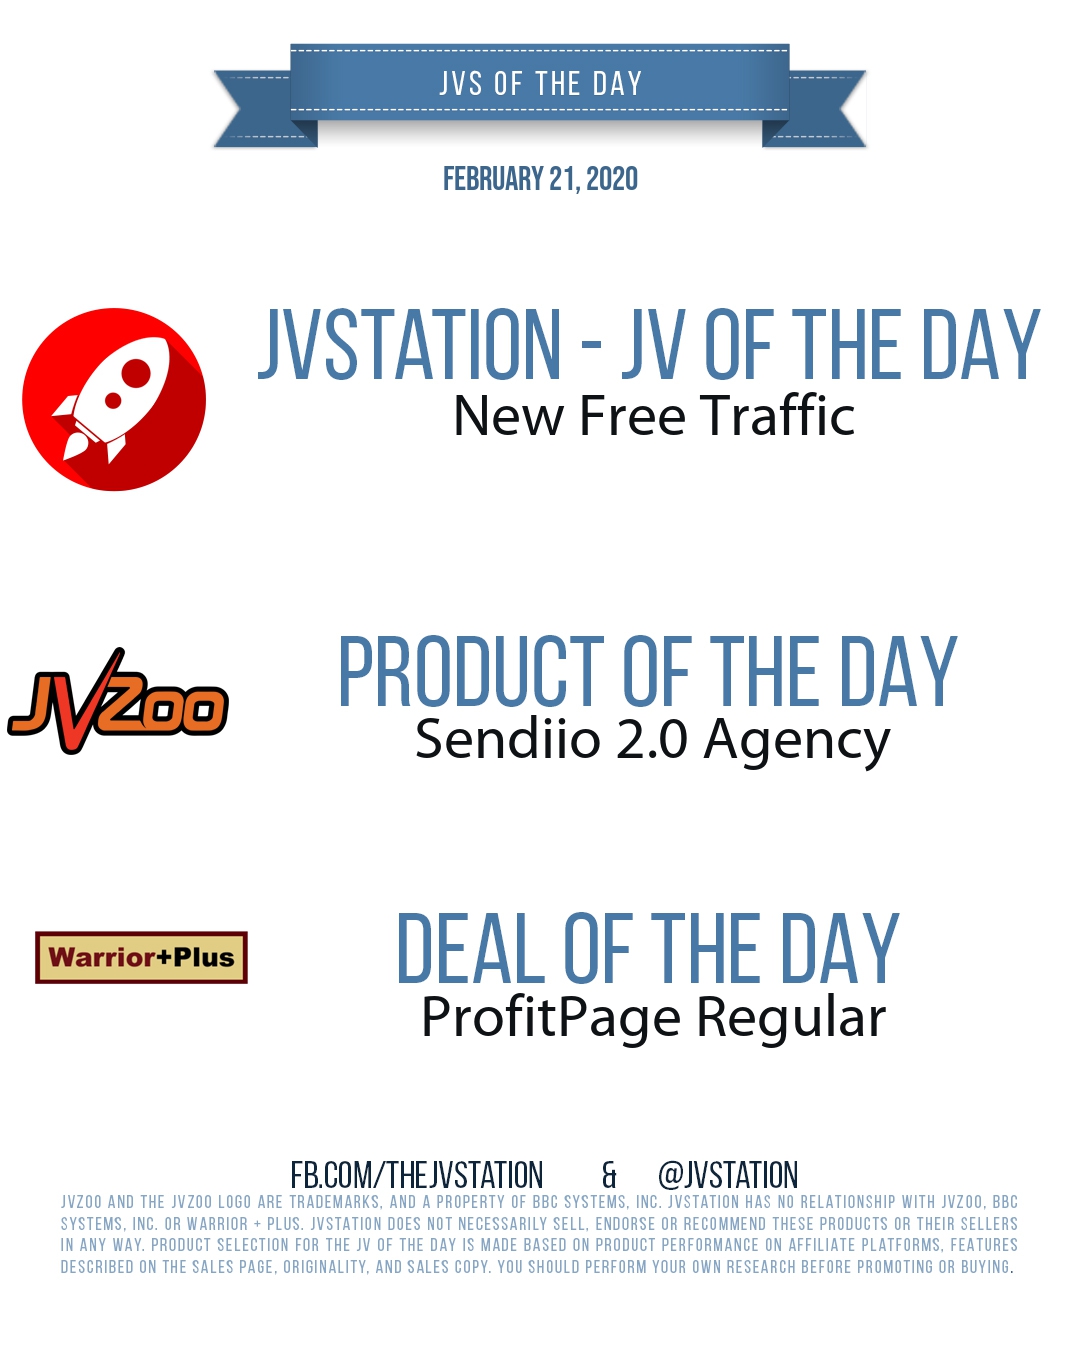 JVs of the day - February 21, 2020